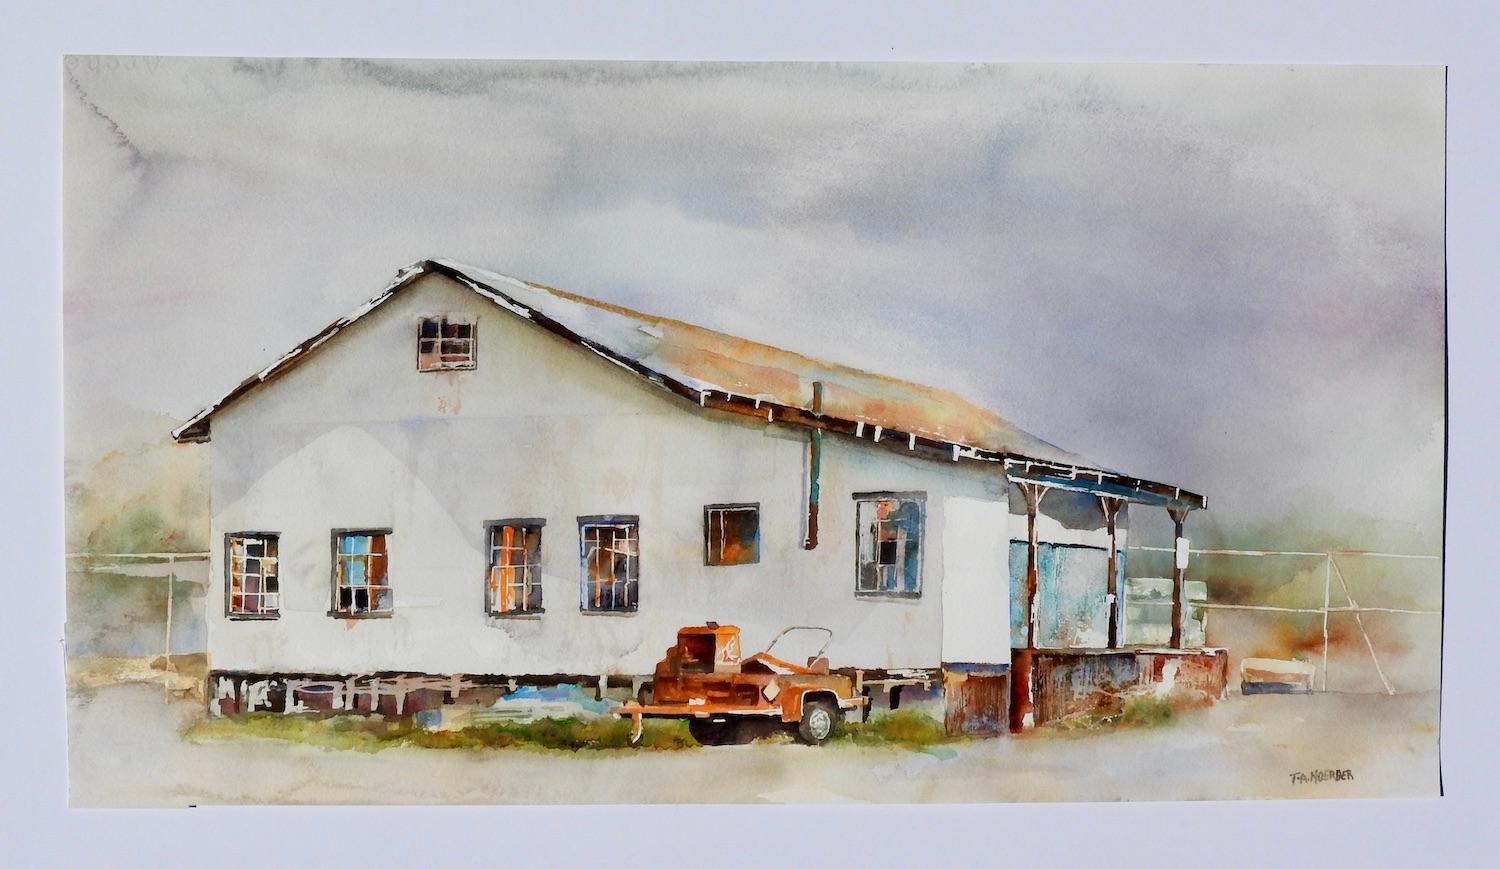 <p>Artist Comments<br>An abandoned warehouse stands quietly on the side roads of Camarillo, California. Despite the gray, overcast day, the building still displays intriguing colors. The out-of-commission equipment adds to the curiosity of the